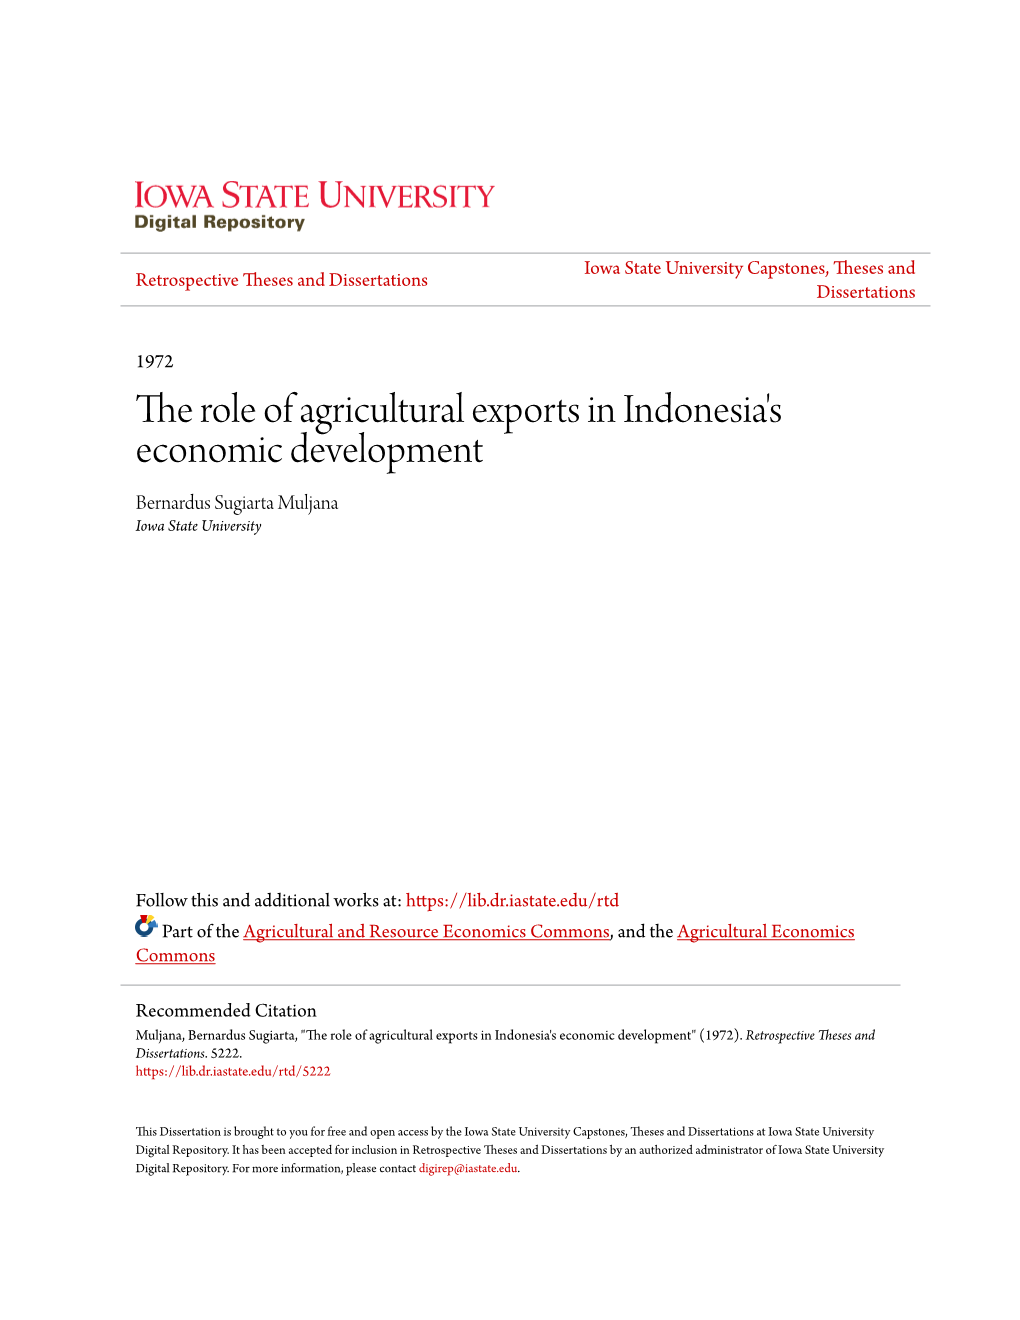 The Role of Agricultural Exports in Indonesia's Economic Development